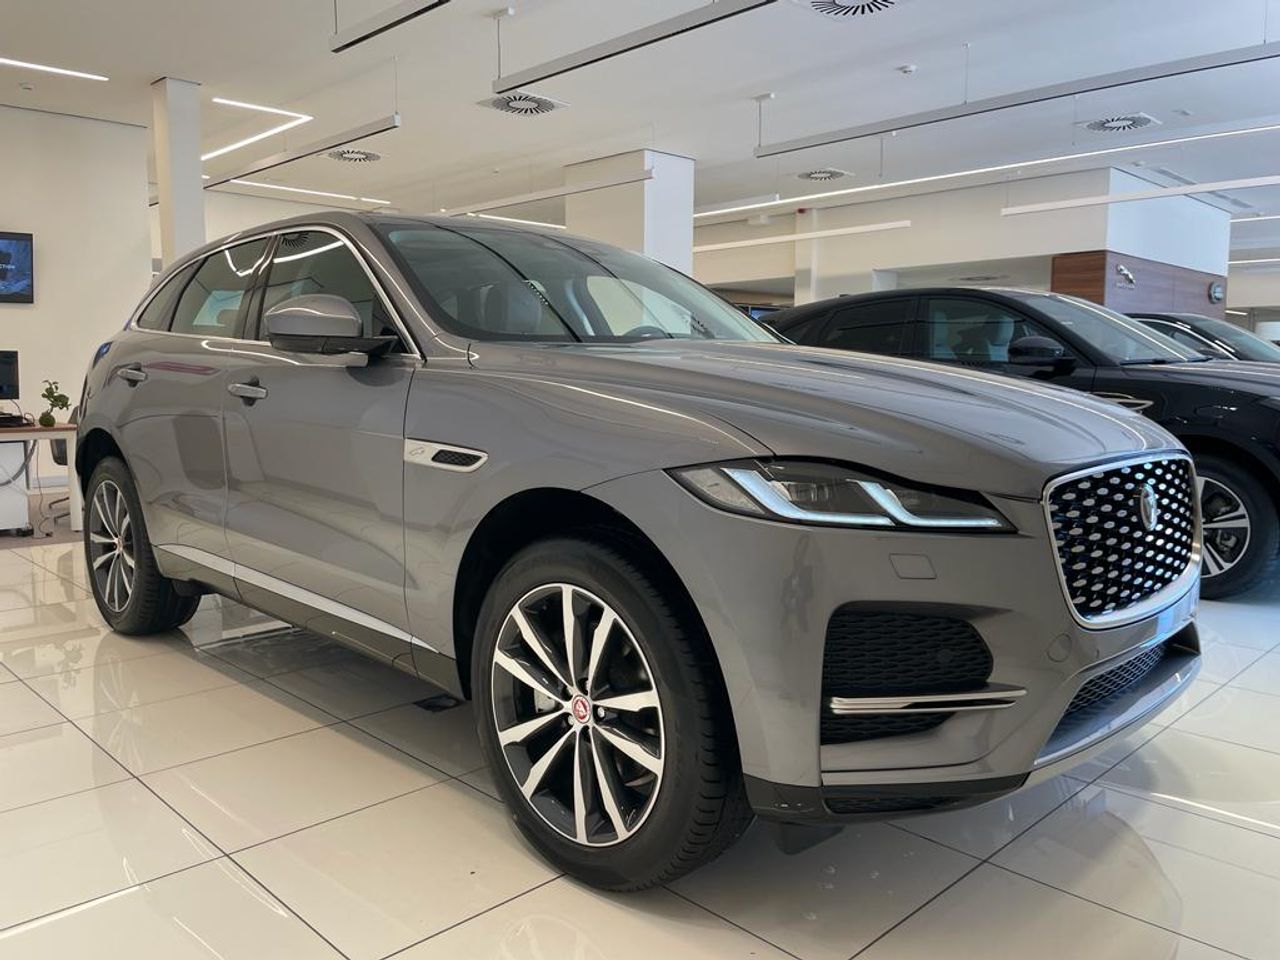 Jaguar F-Pace 2.0D I4 204PS AWD Auto MHEV S Limited Edition   - Foto 1